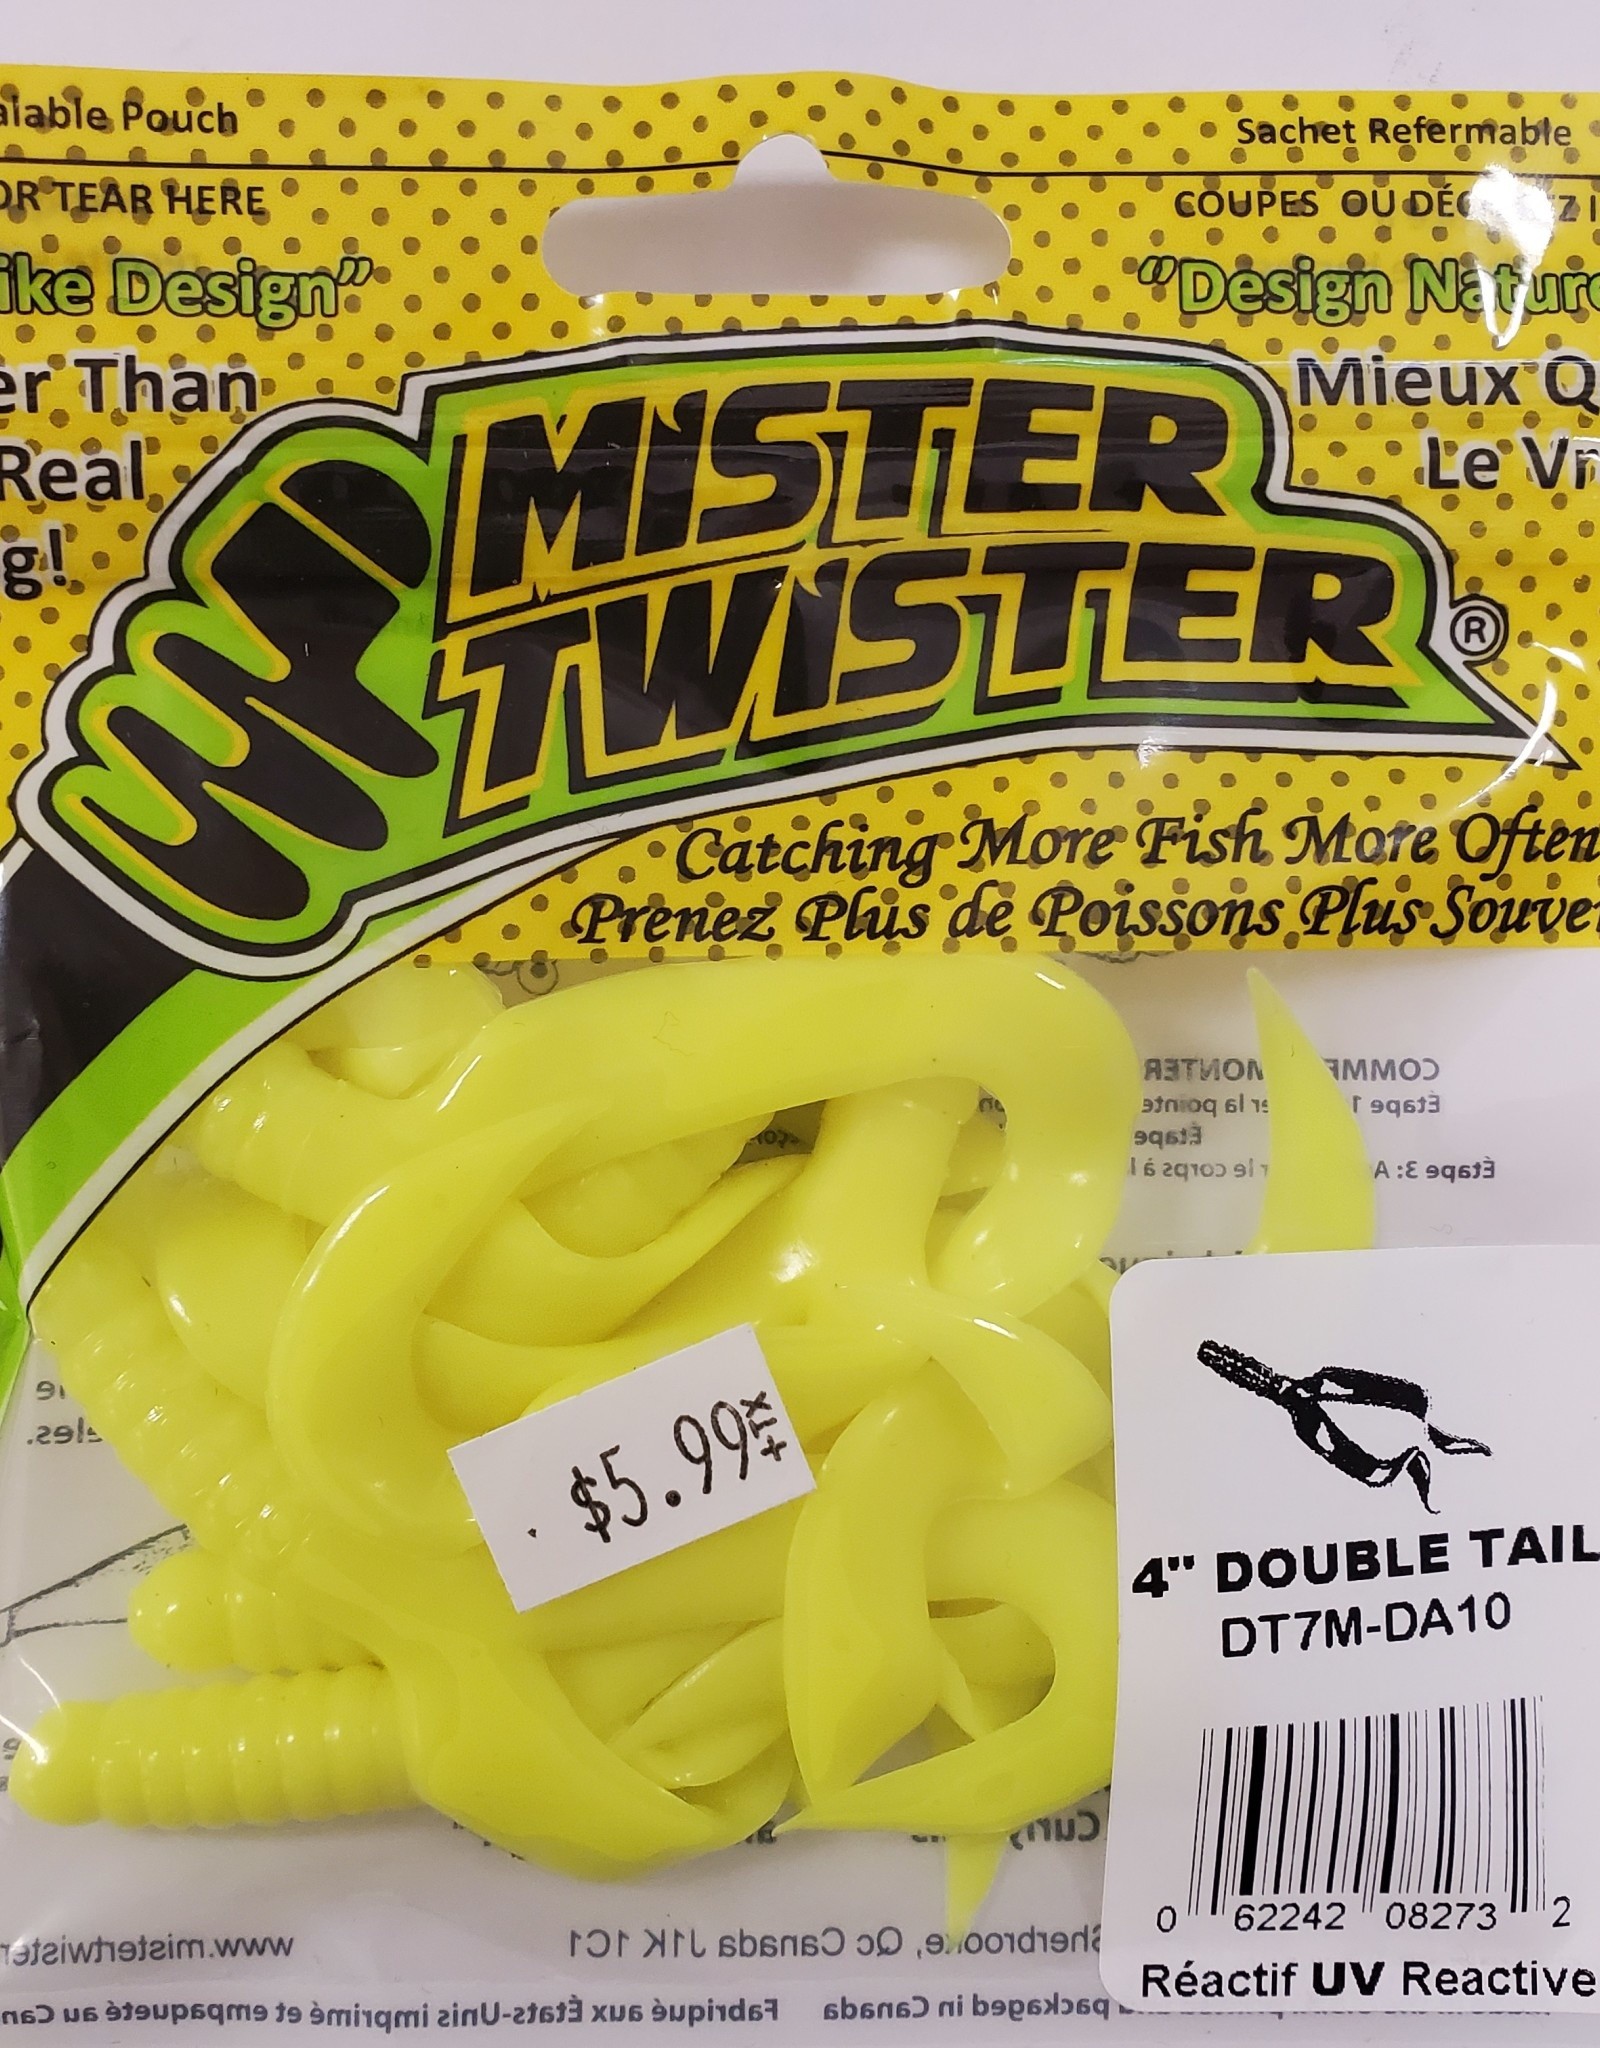 Mister Twister Double tail opaque chart 4 - Fehrs Sporting Goods Inc.